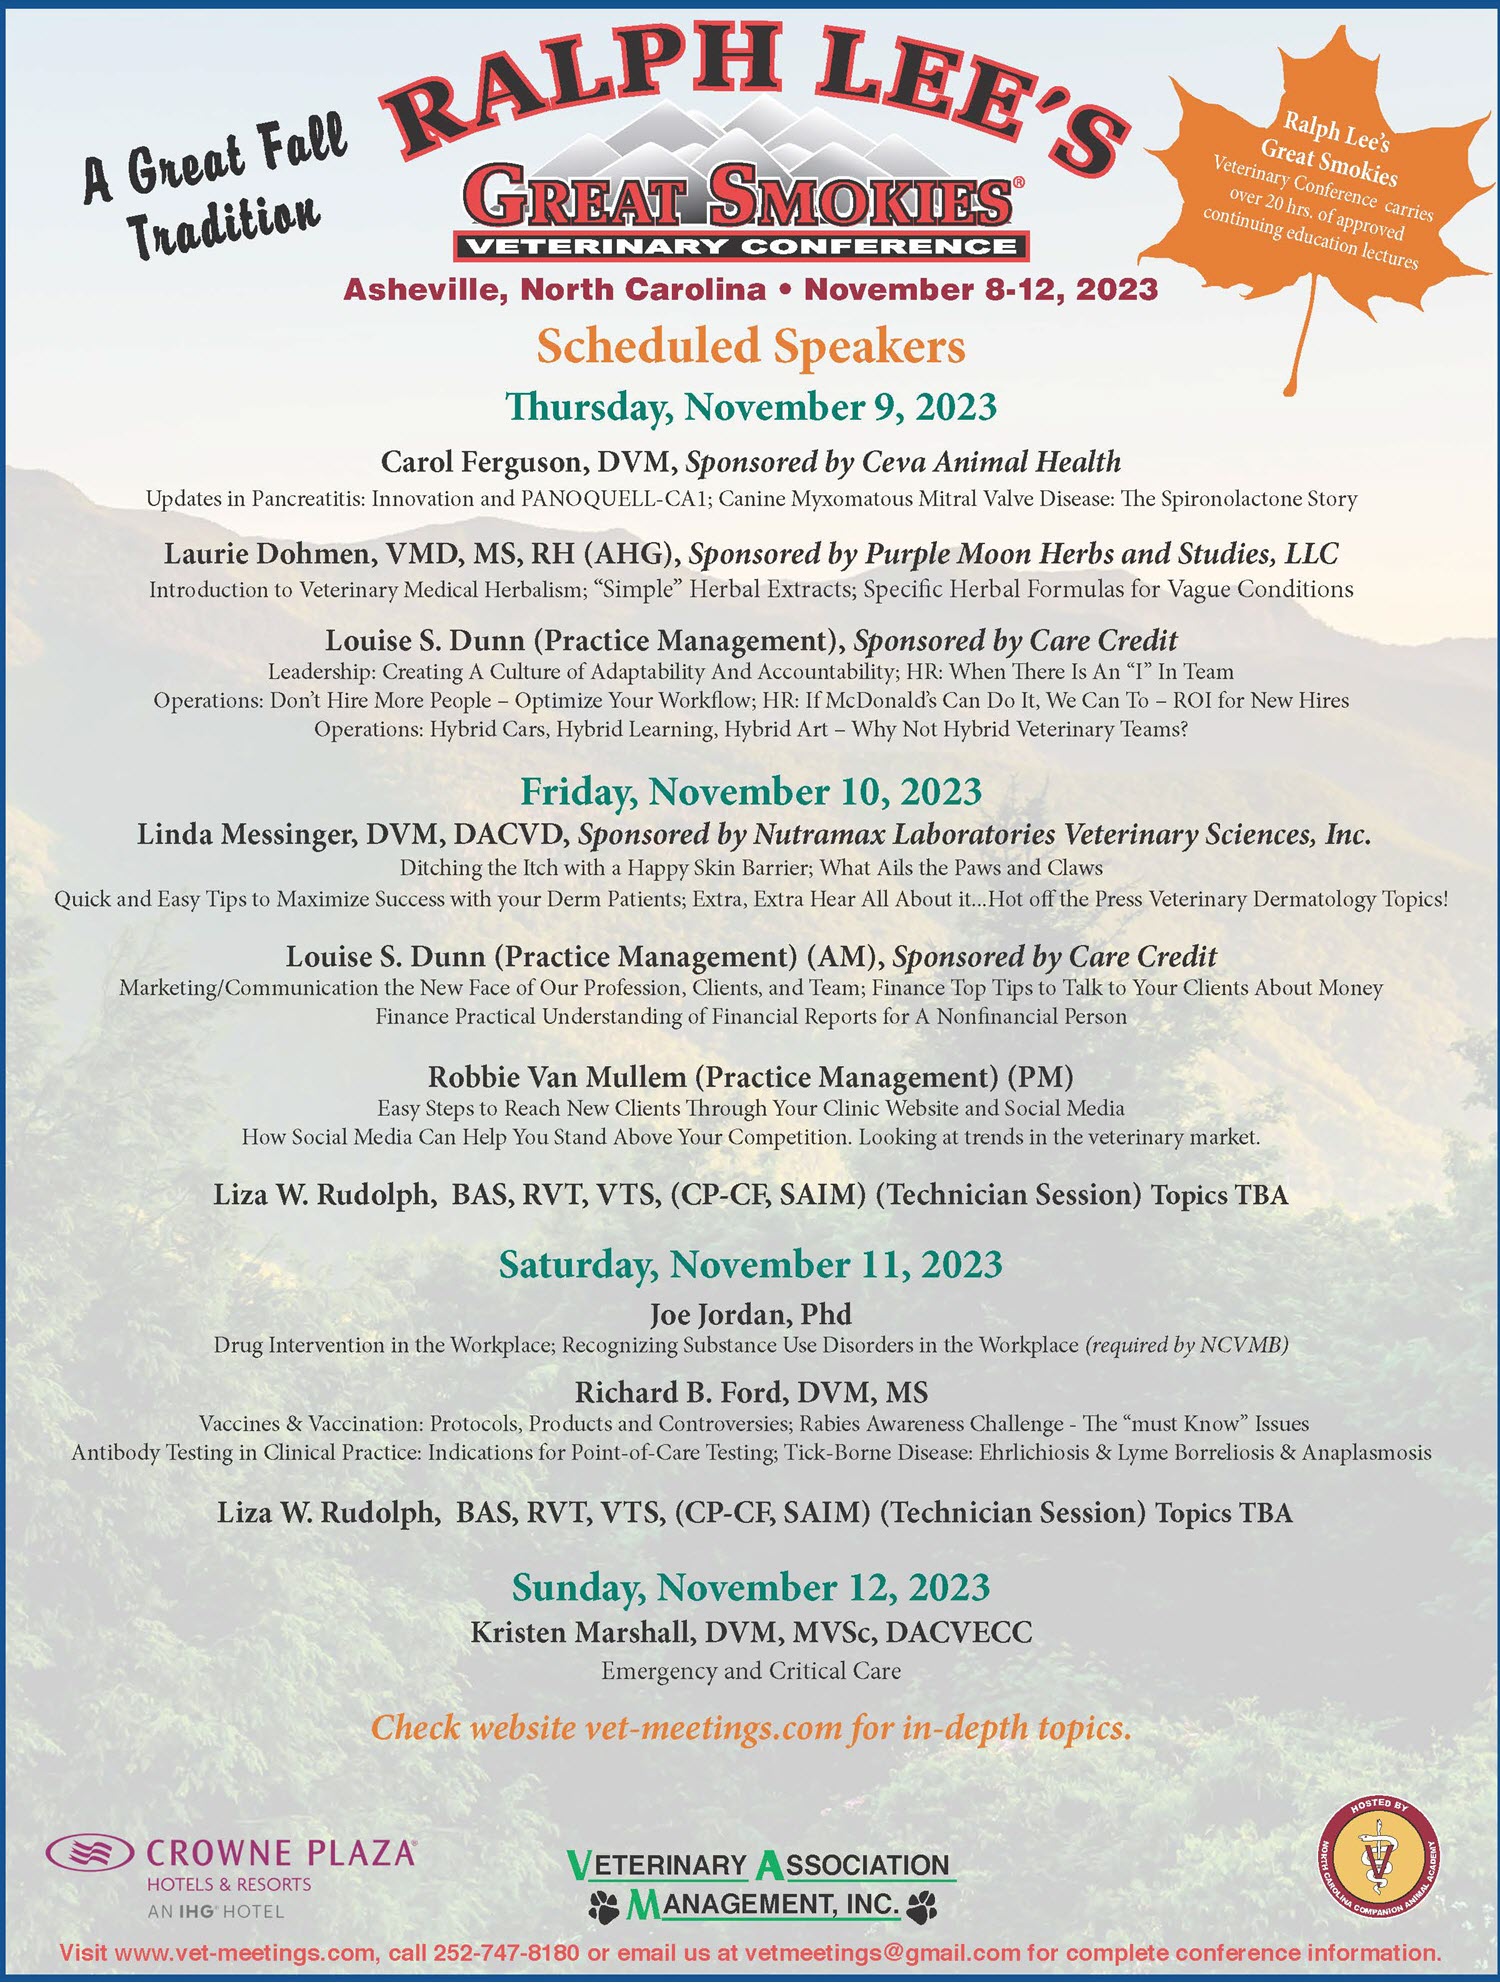 Ralph Lee's Great Smokies Veterinary Conference November 8 - 12 2023 A Great Fall Conference in Asheville, North Carolina